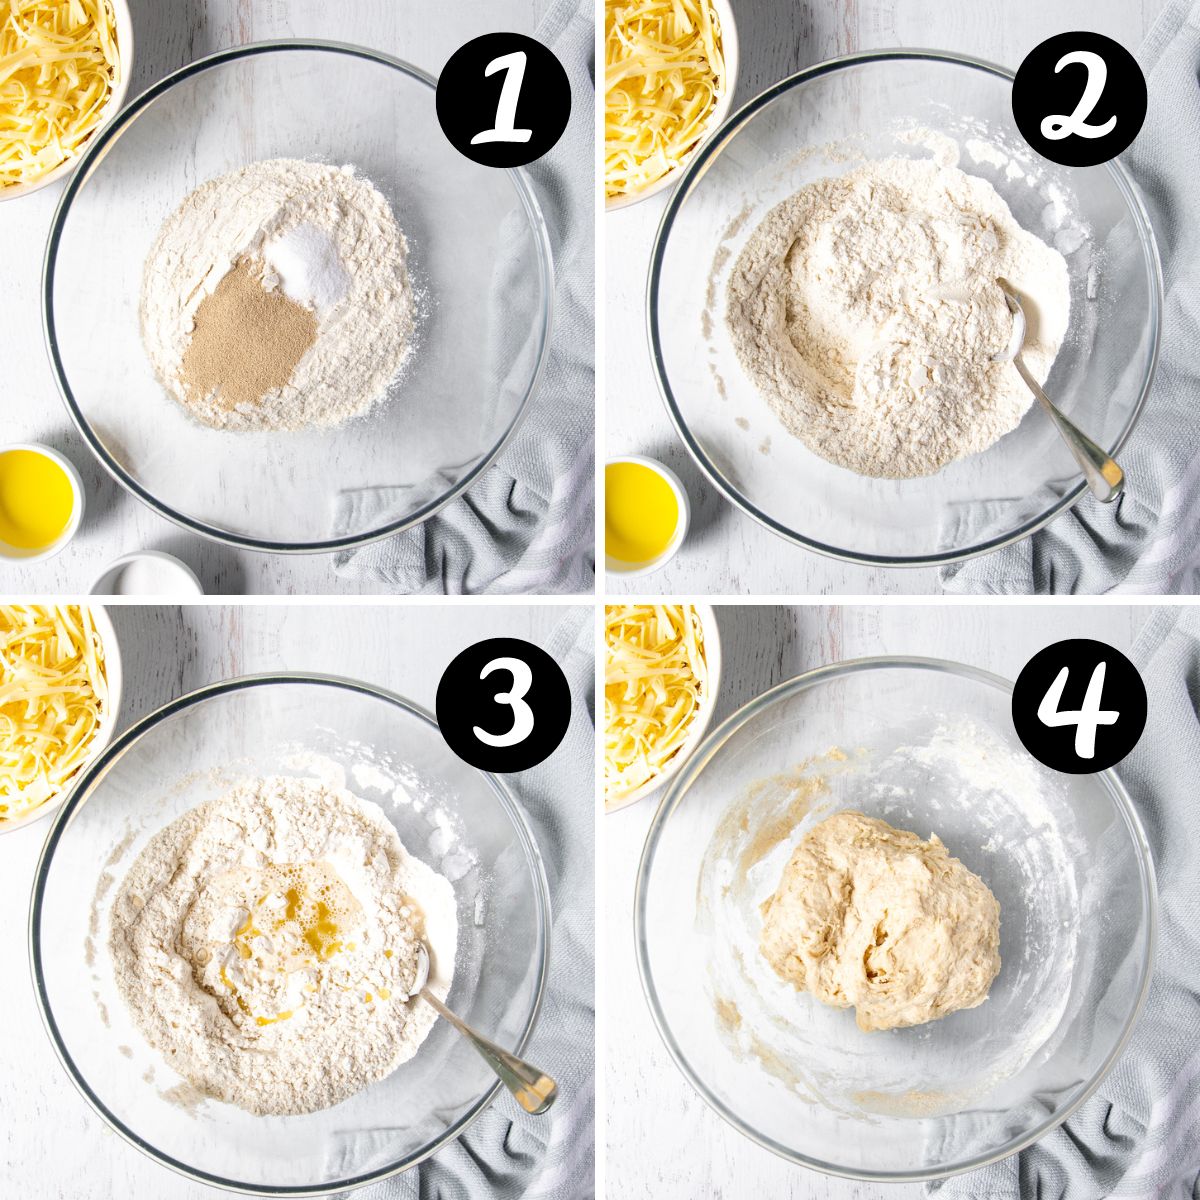 images showing dry ingredients being made into dough